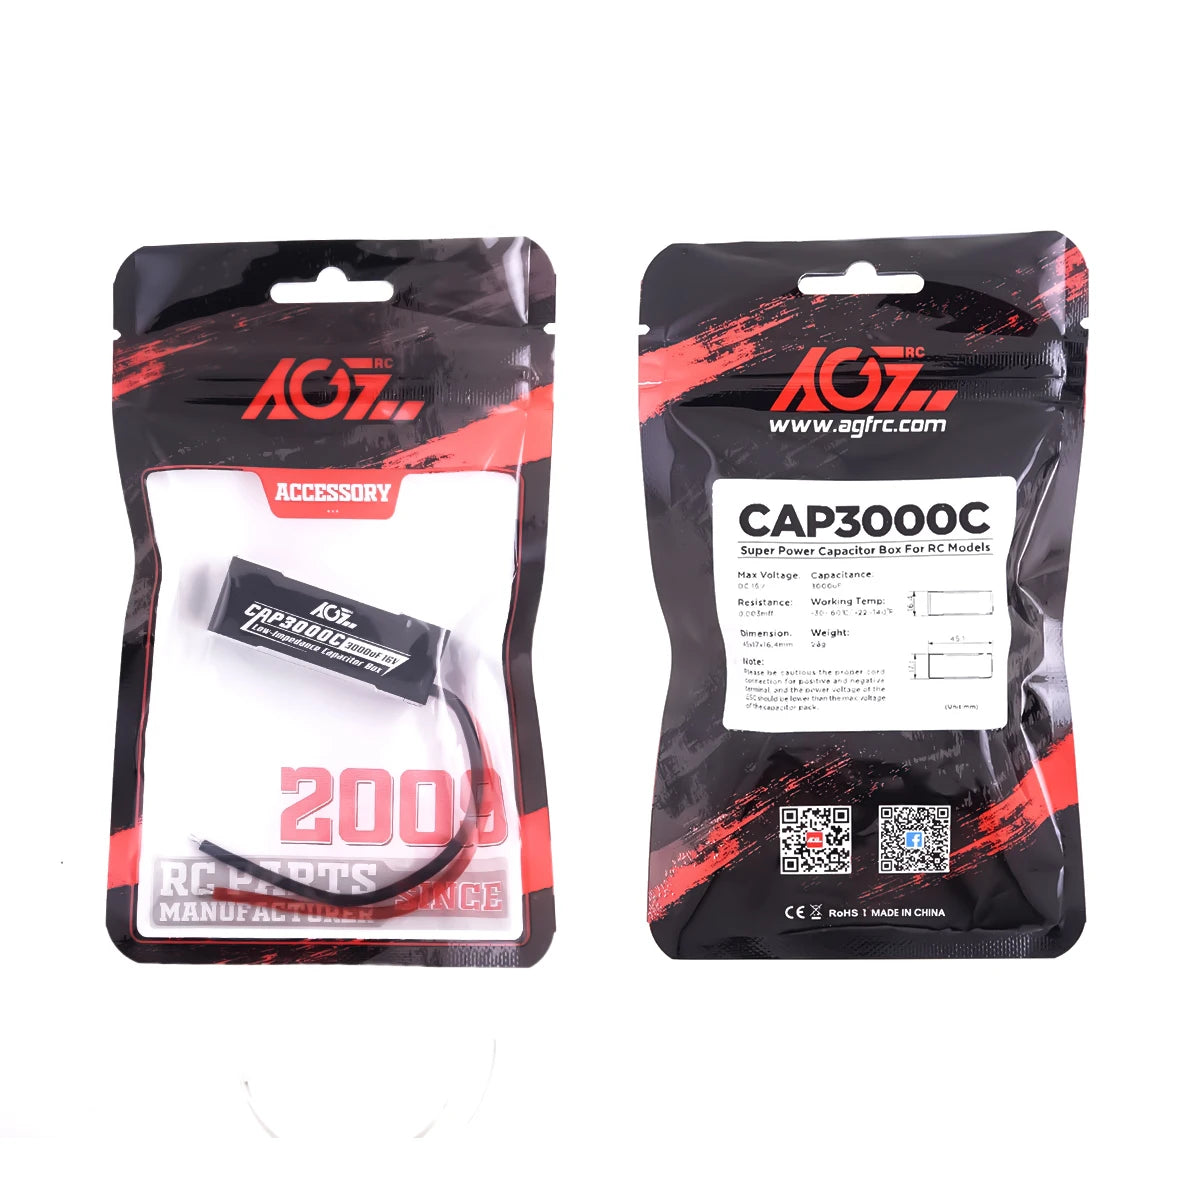 ACCESSORY CAP3OOOC Super Power Capacitor Box For 